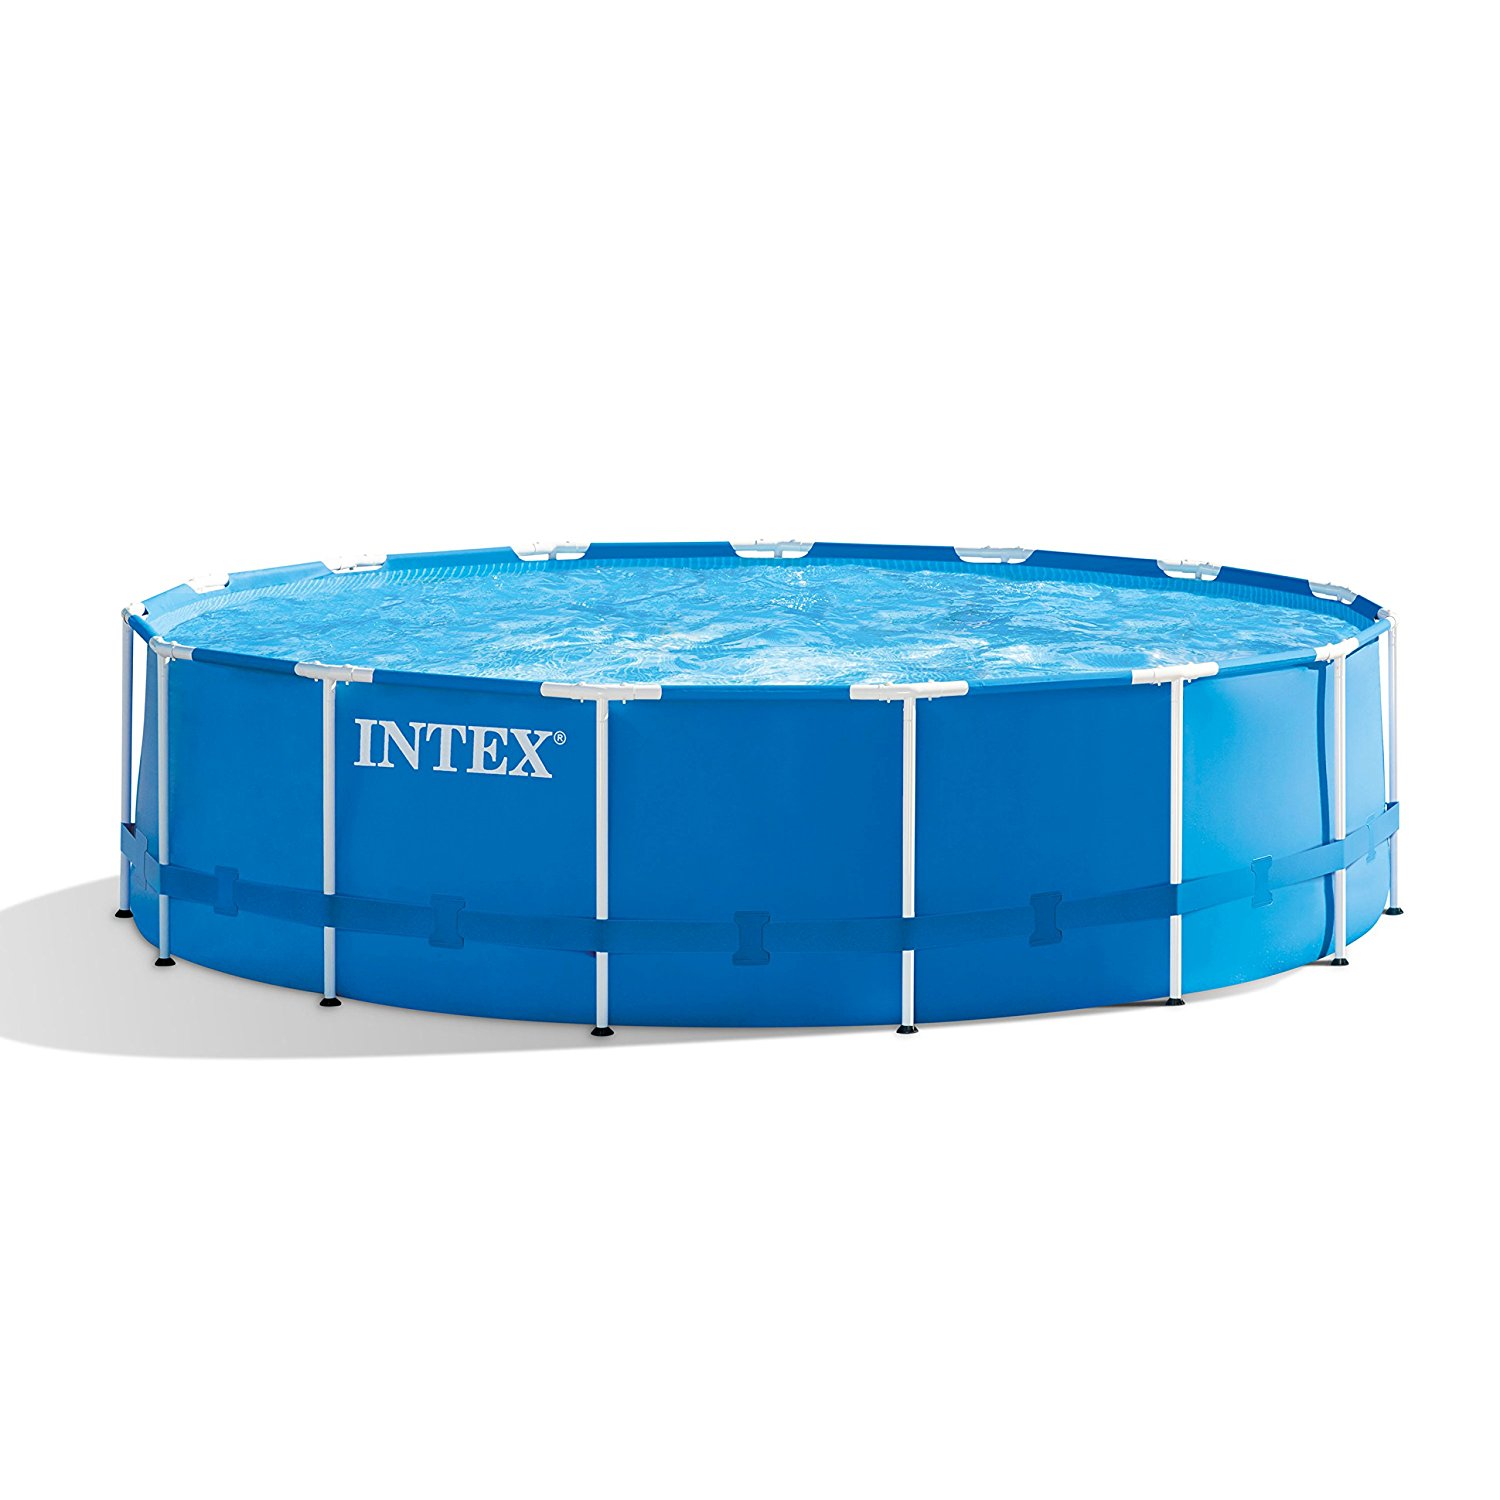 Intex 28241EH 15ft X 48in Metal Frame Pool Set with Filter Pump, Ladder, Ground Cloth & Pool